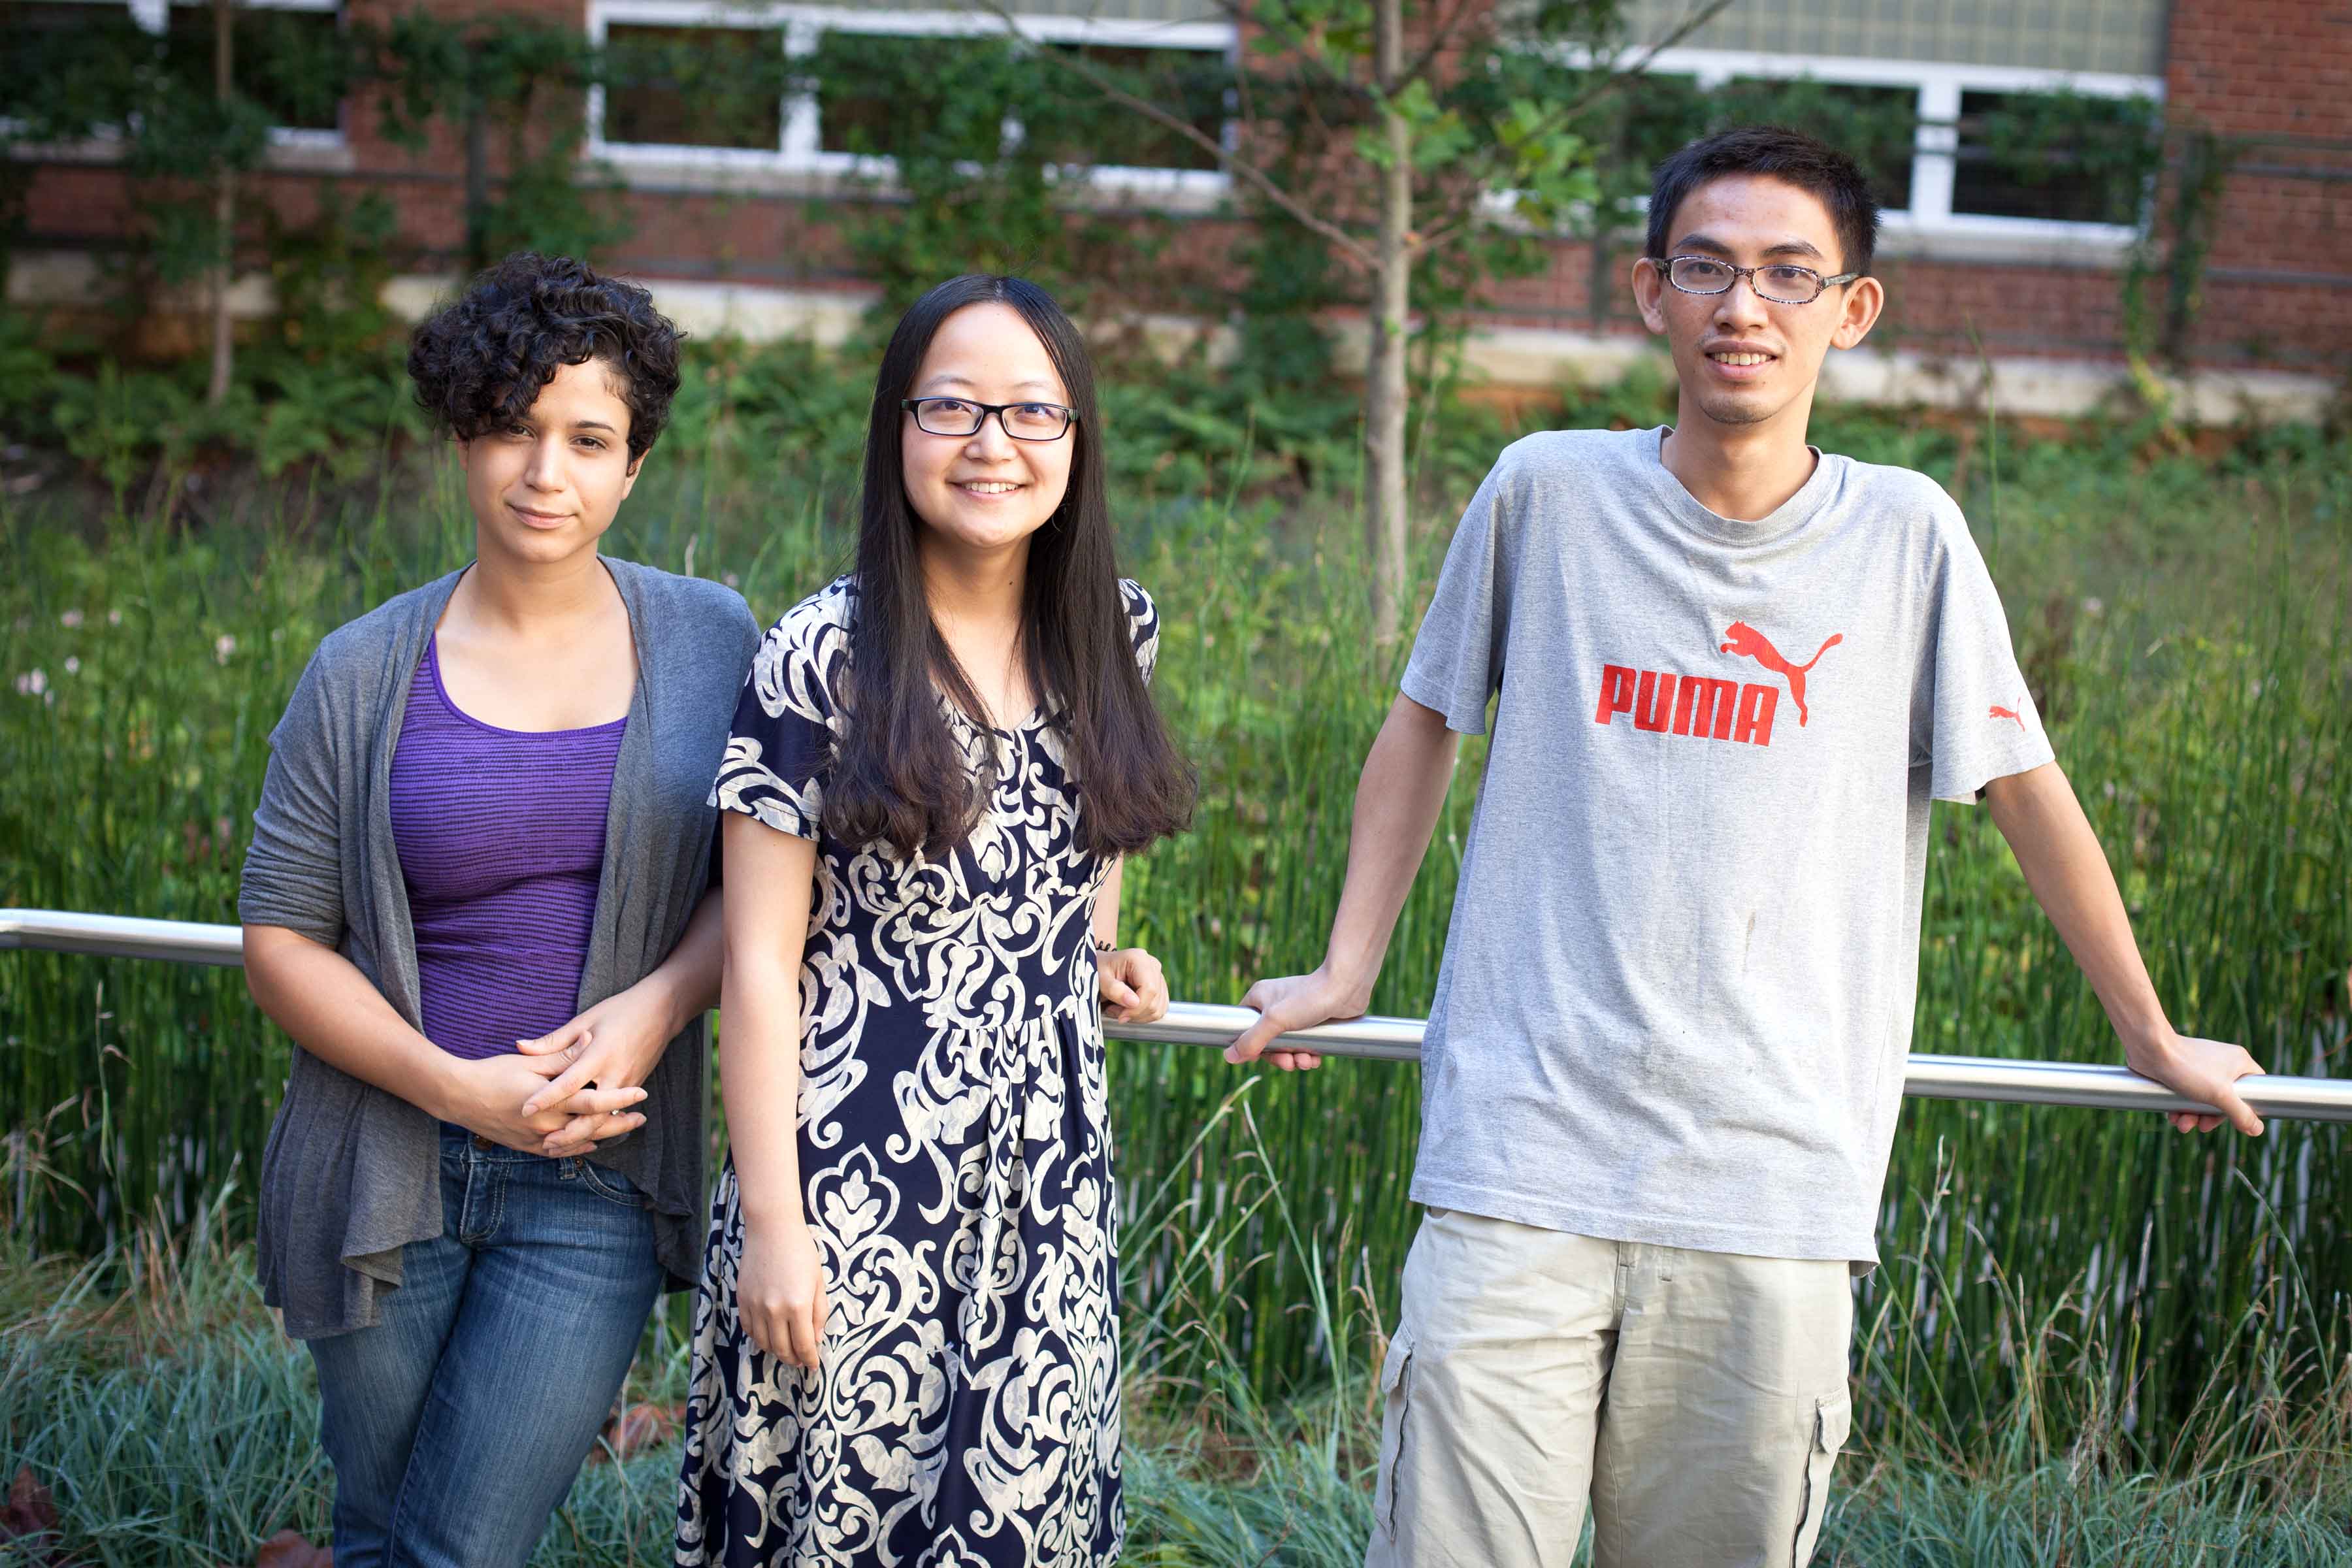 Marlen Gonzalez, left, Ph.D. candidate in psychology, Qiannan Yin, center, Ph.D. candidate in statistics, and Shize Su, Ph.D. candidate in electrical and computer engineering.